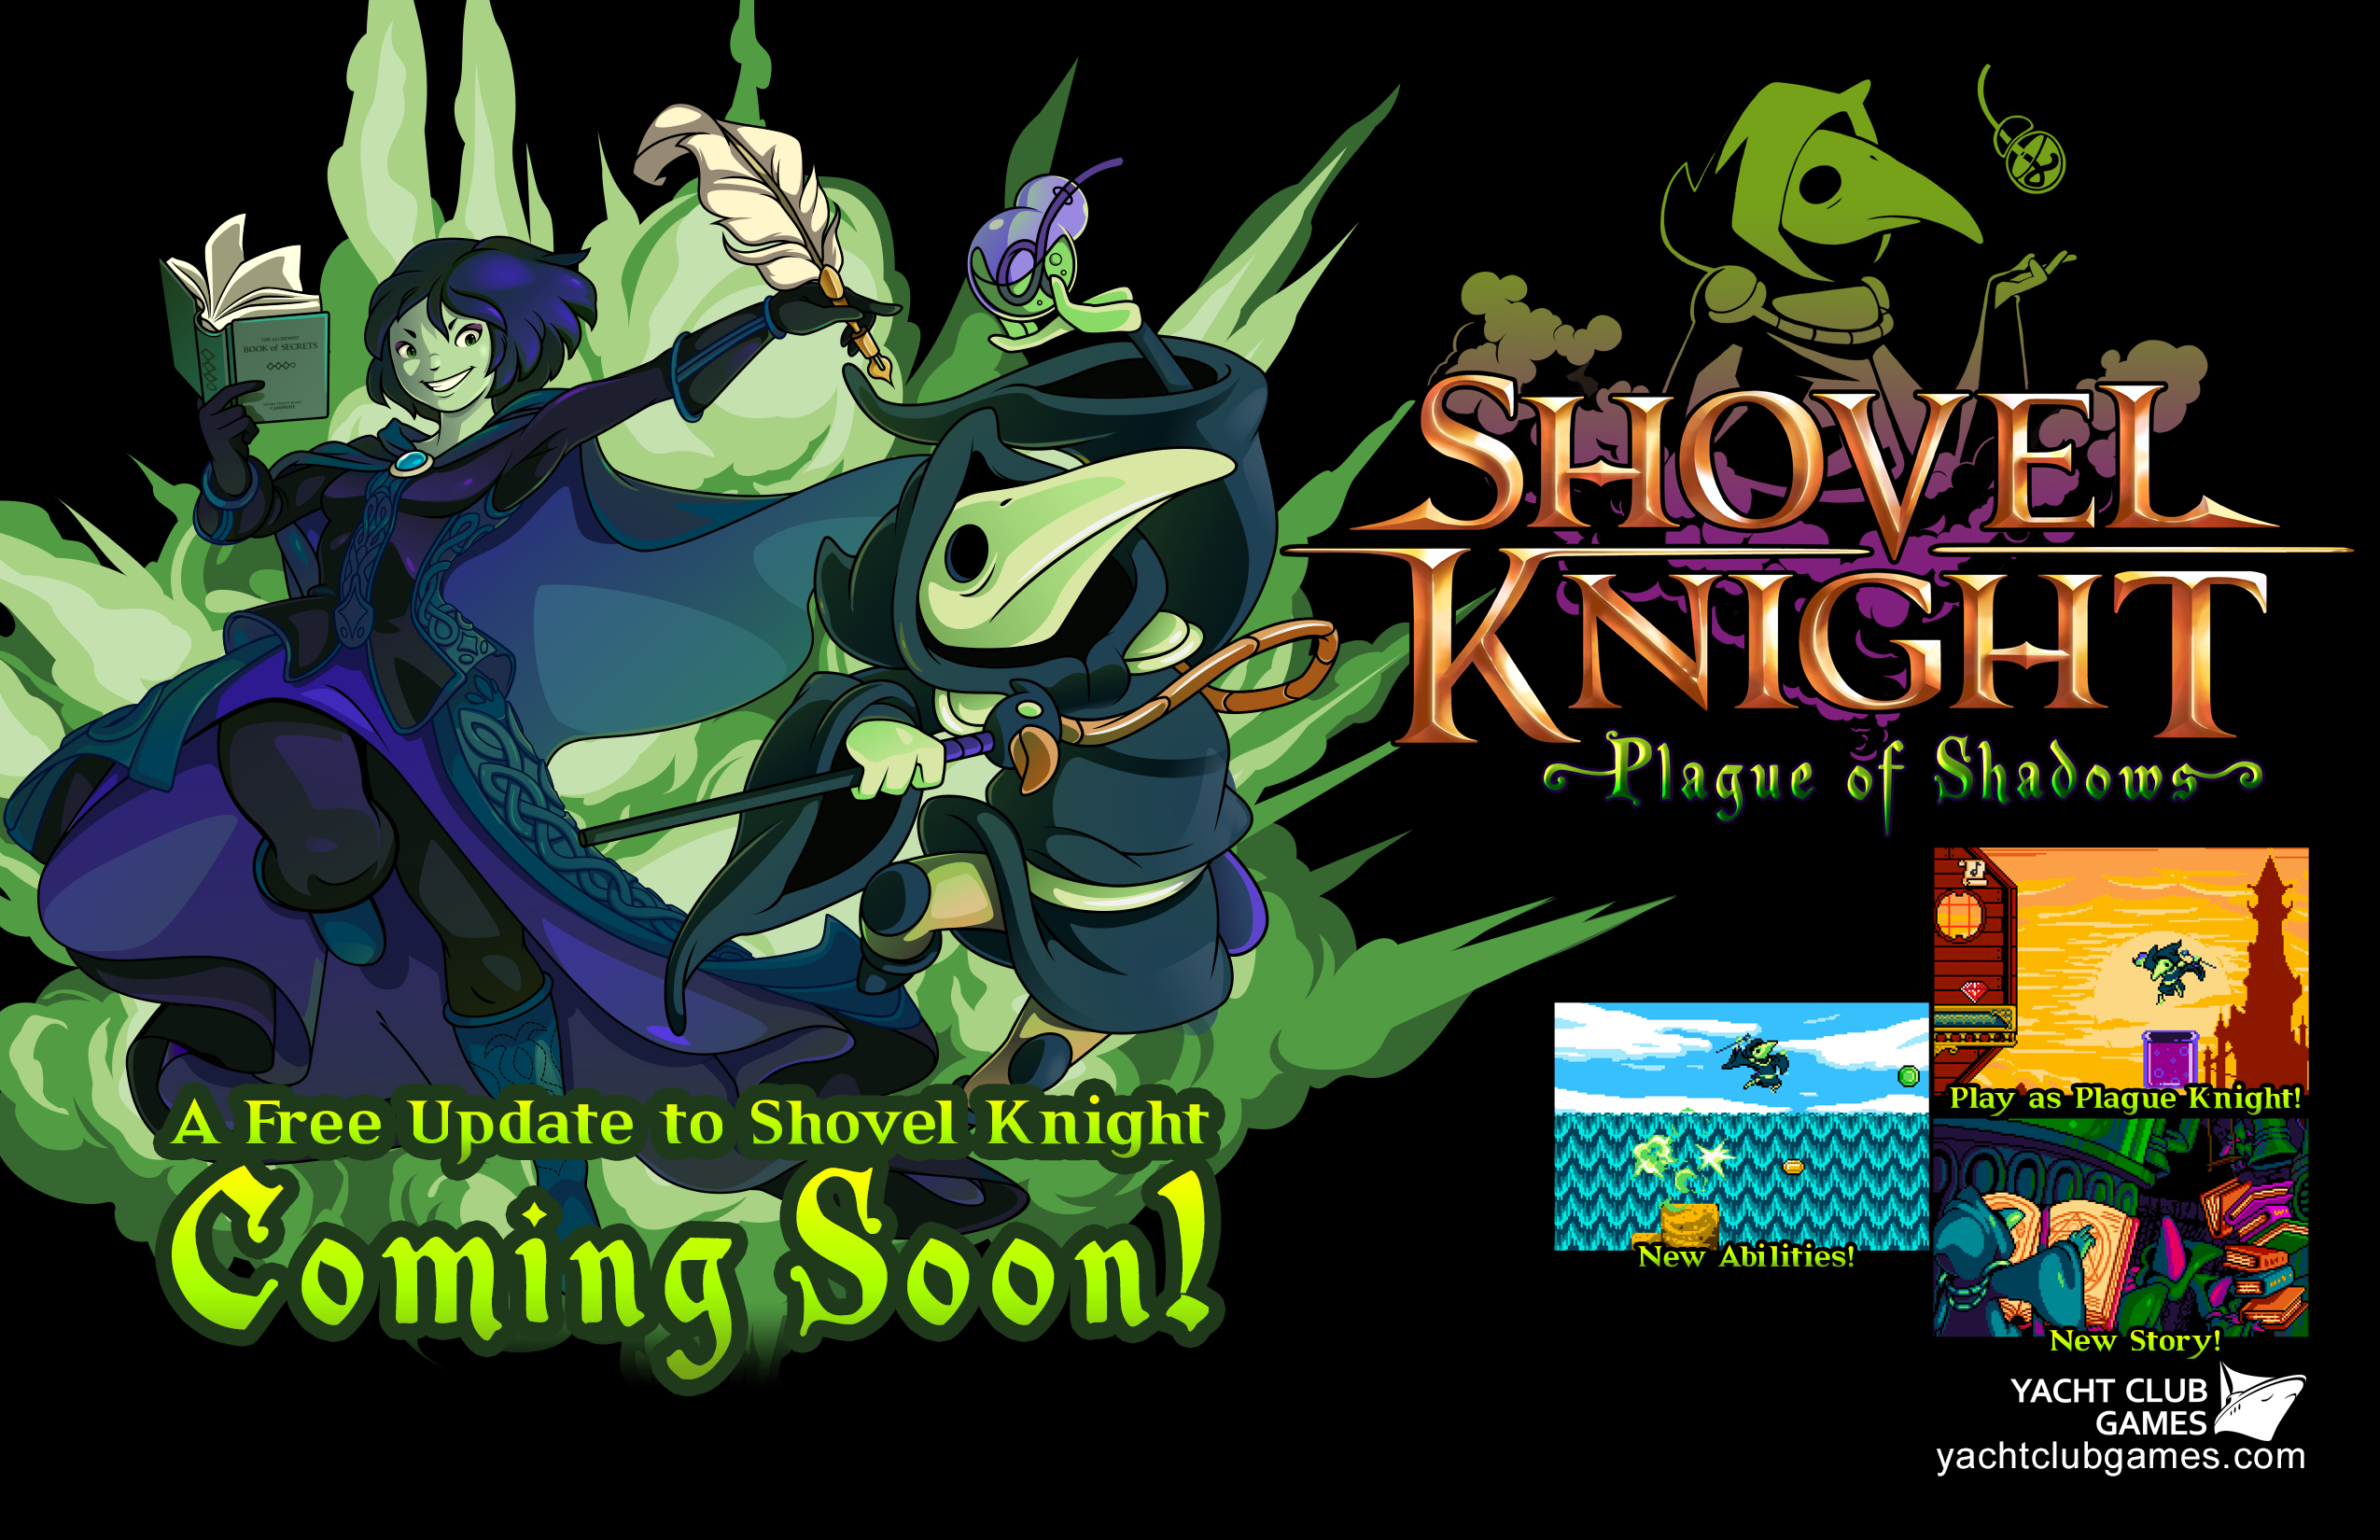 eshop: Shovel Knight Plague of Shadows Expansion is Expected To Hit The Wii U by Early Summer! Plague_Flyer